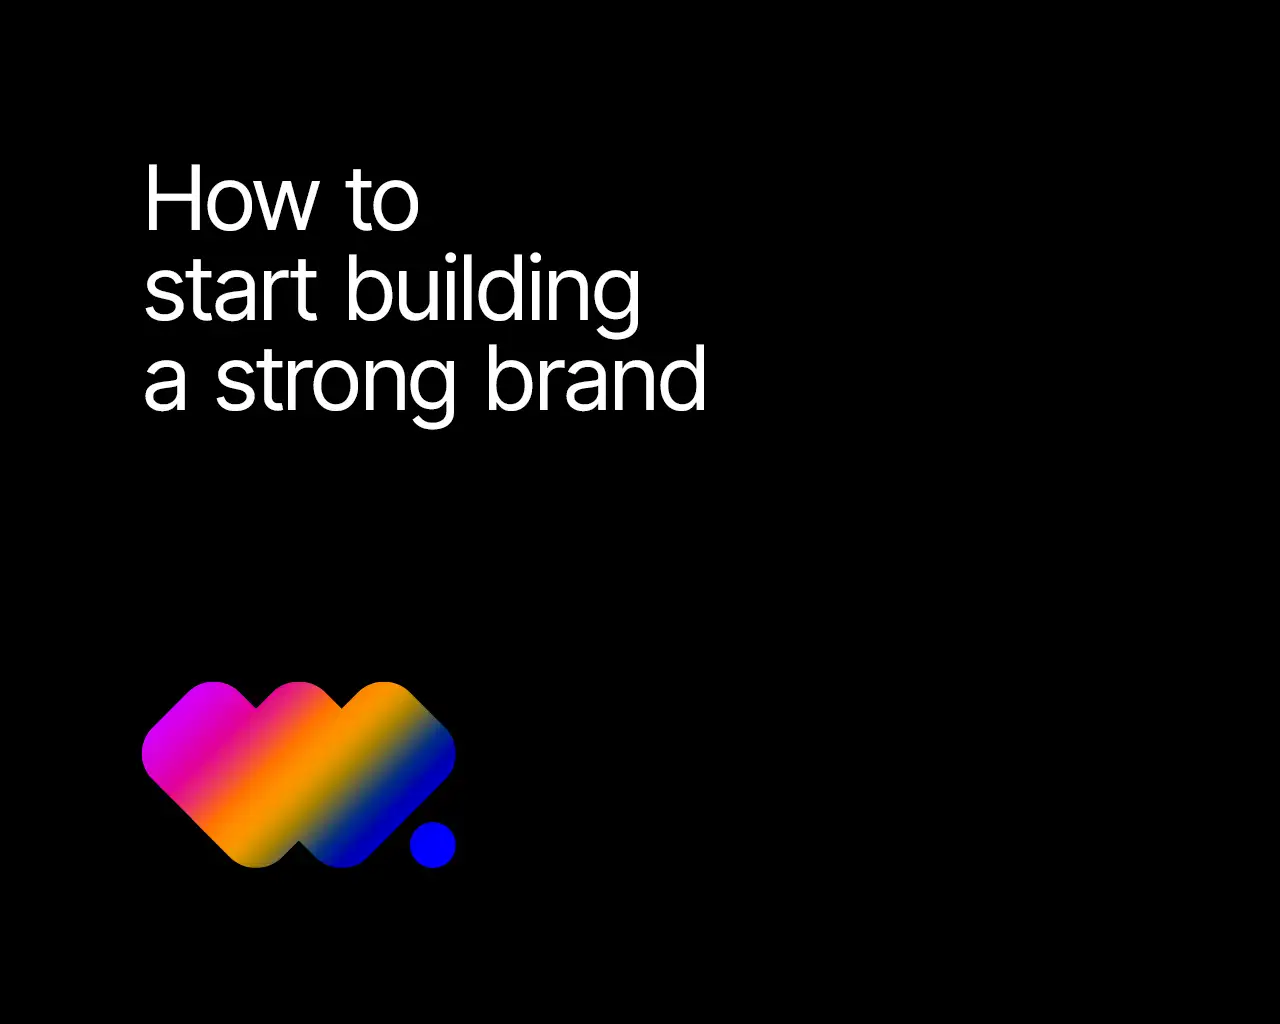 How to start building a strong brand